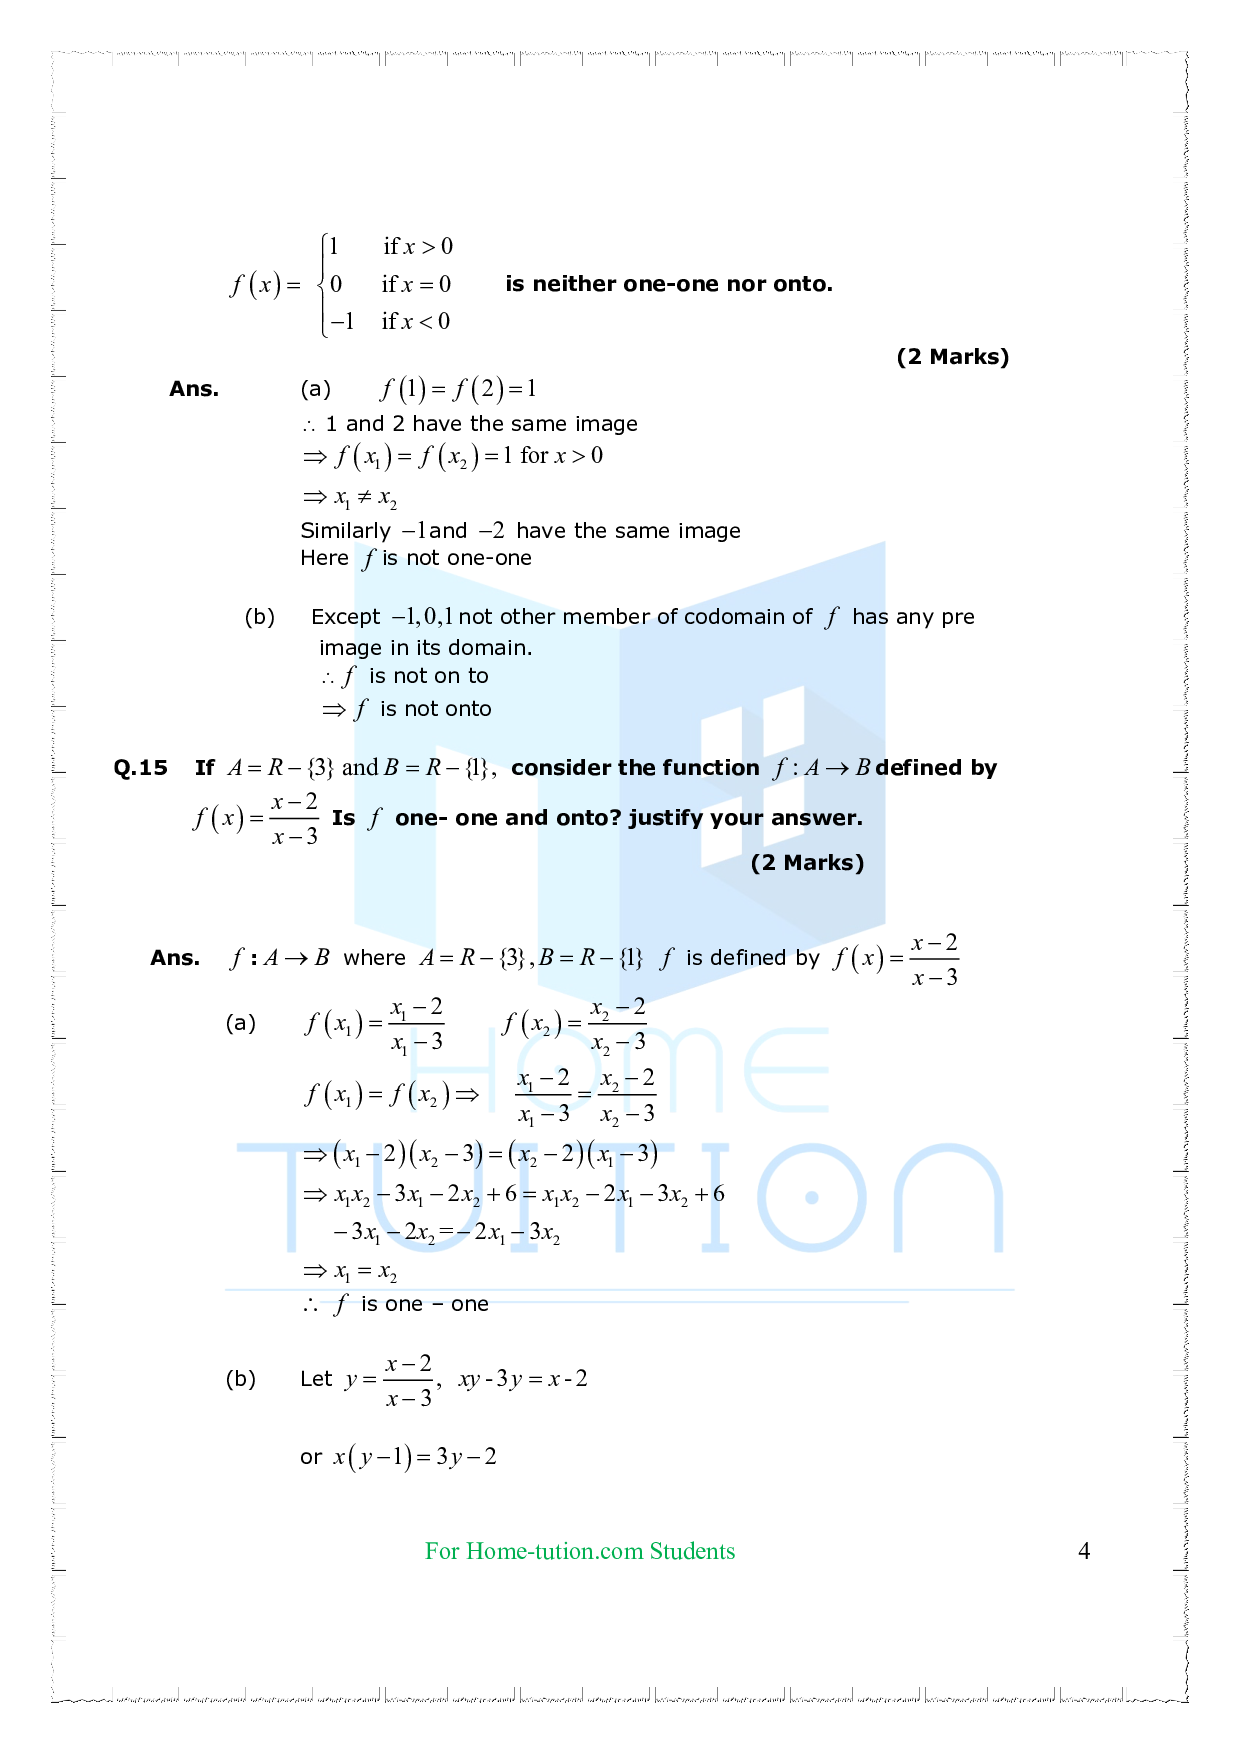 Chapter 1 Relations and Functions Important Questions